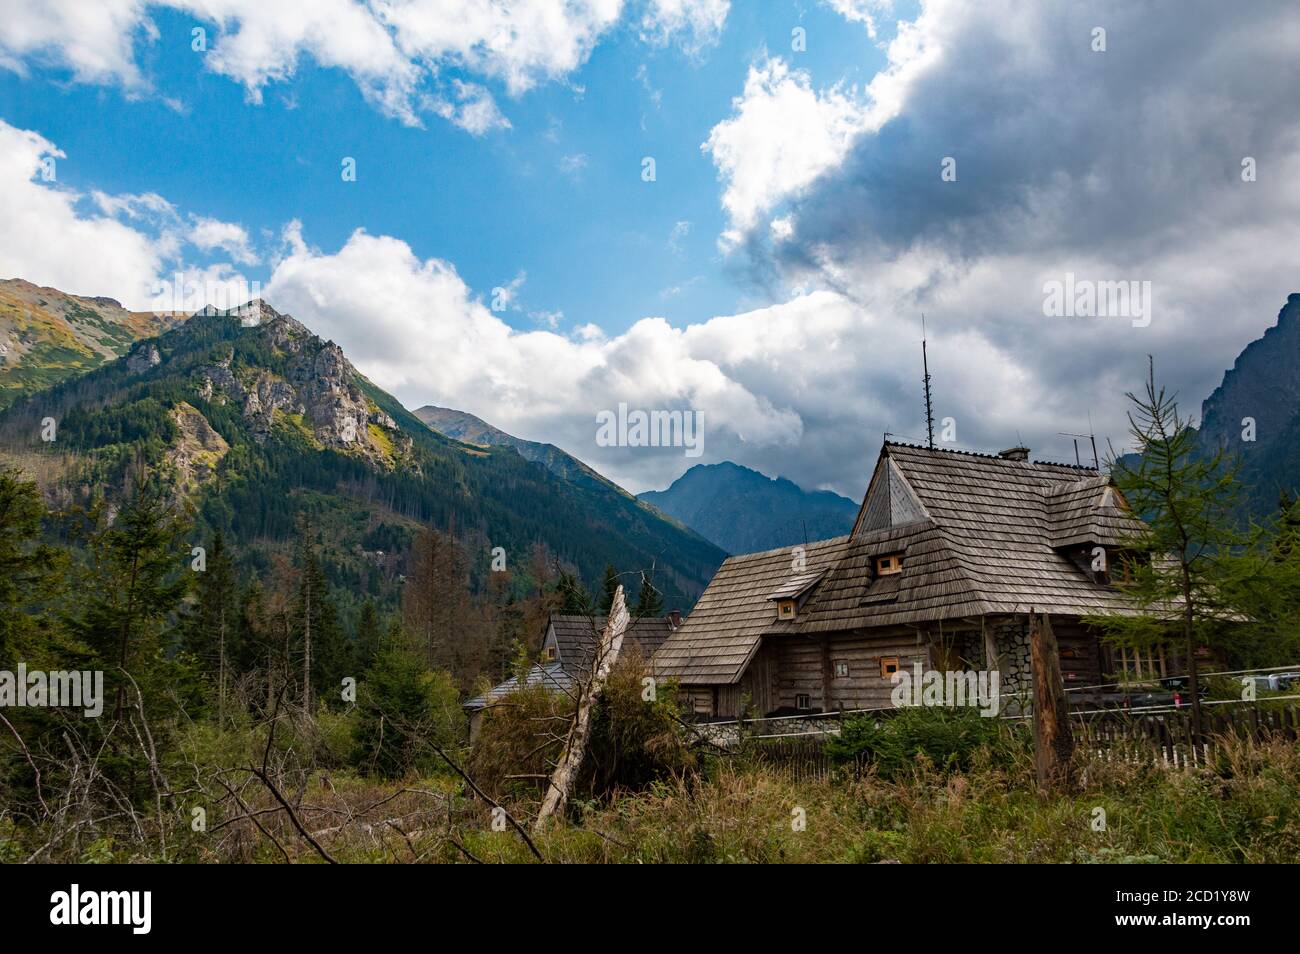 A picture of two huts in the Tatra Mountains. Stock Photo